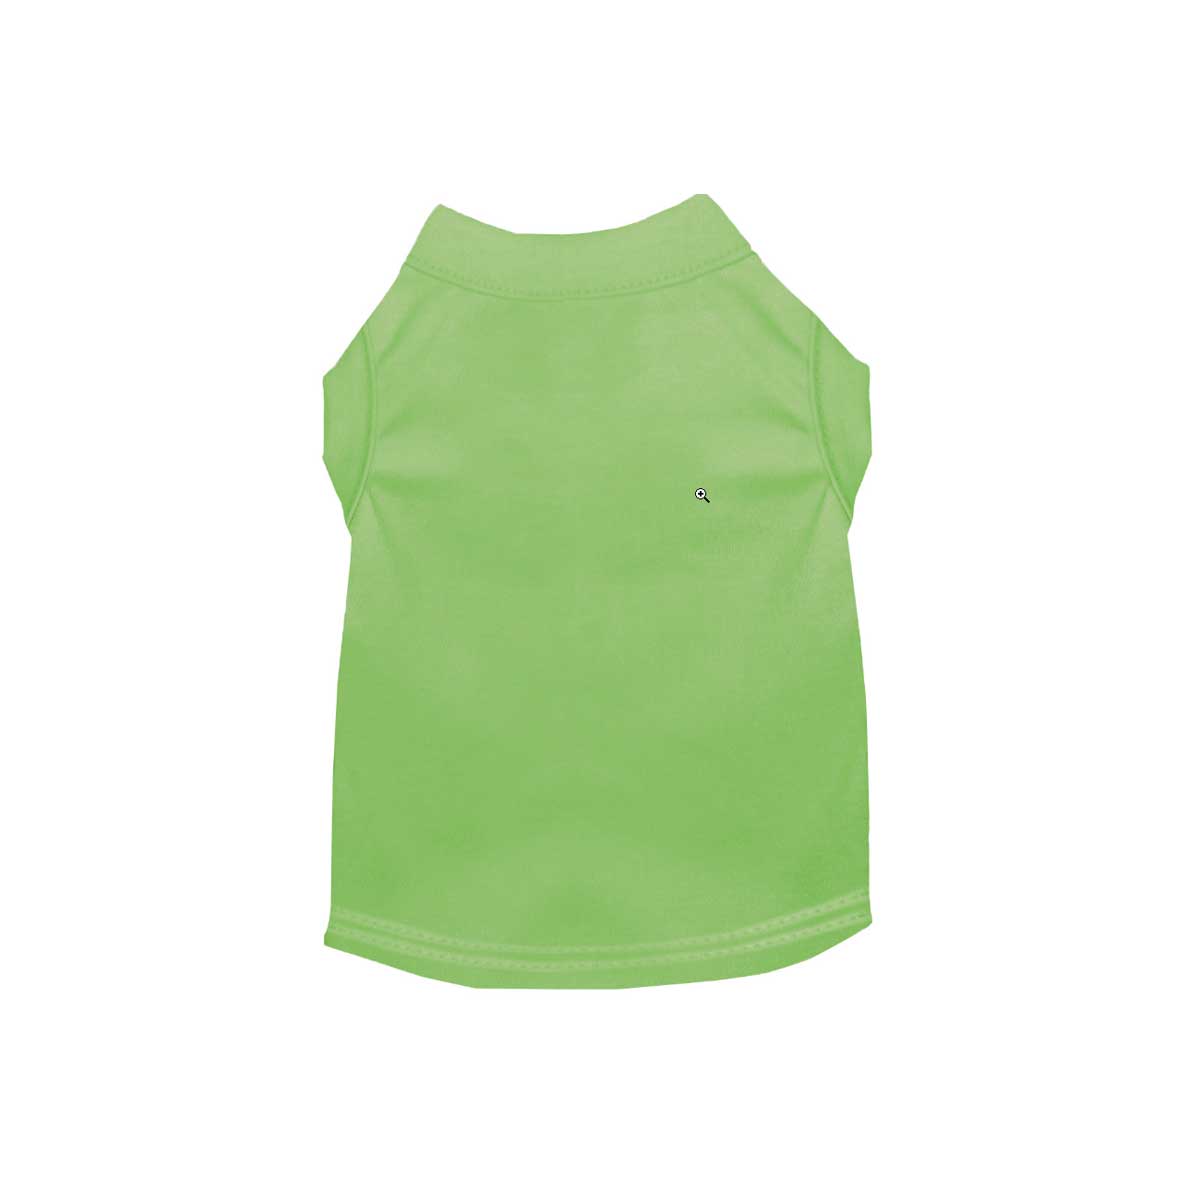 Cotton Poly Blend Tee Shirt in Lime Green | Pawlicious & Company